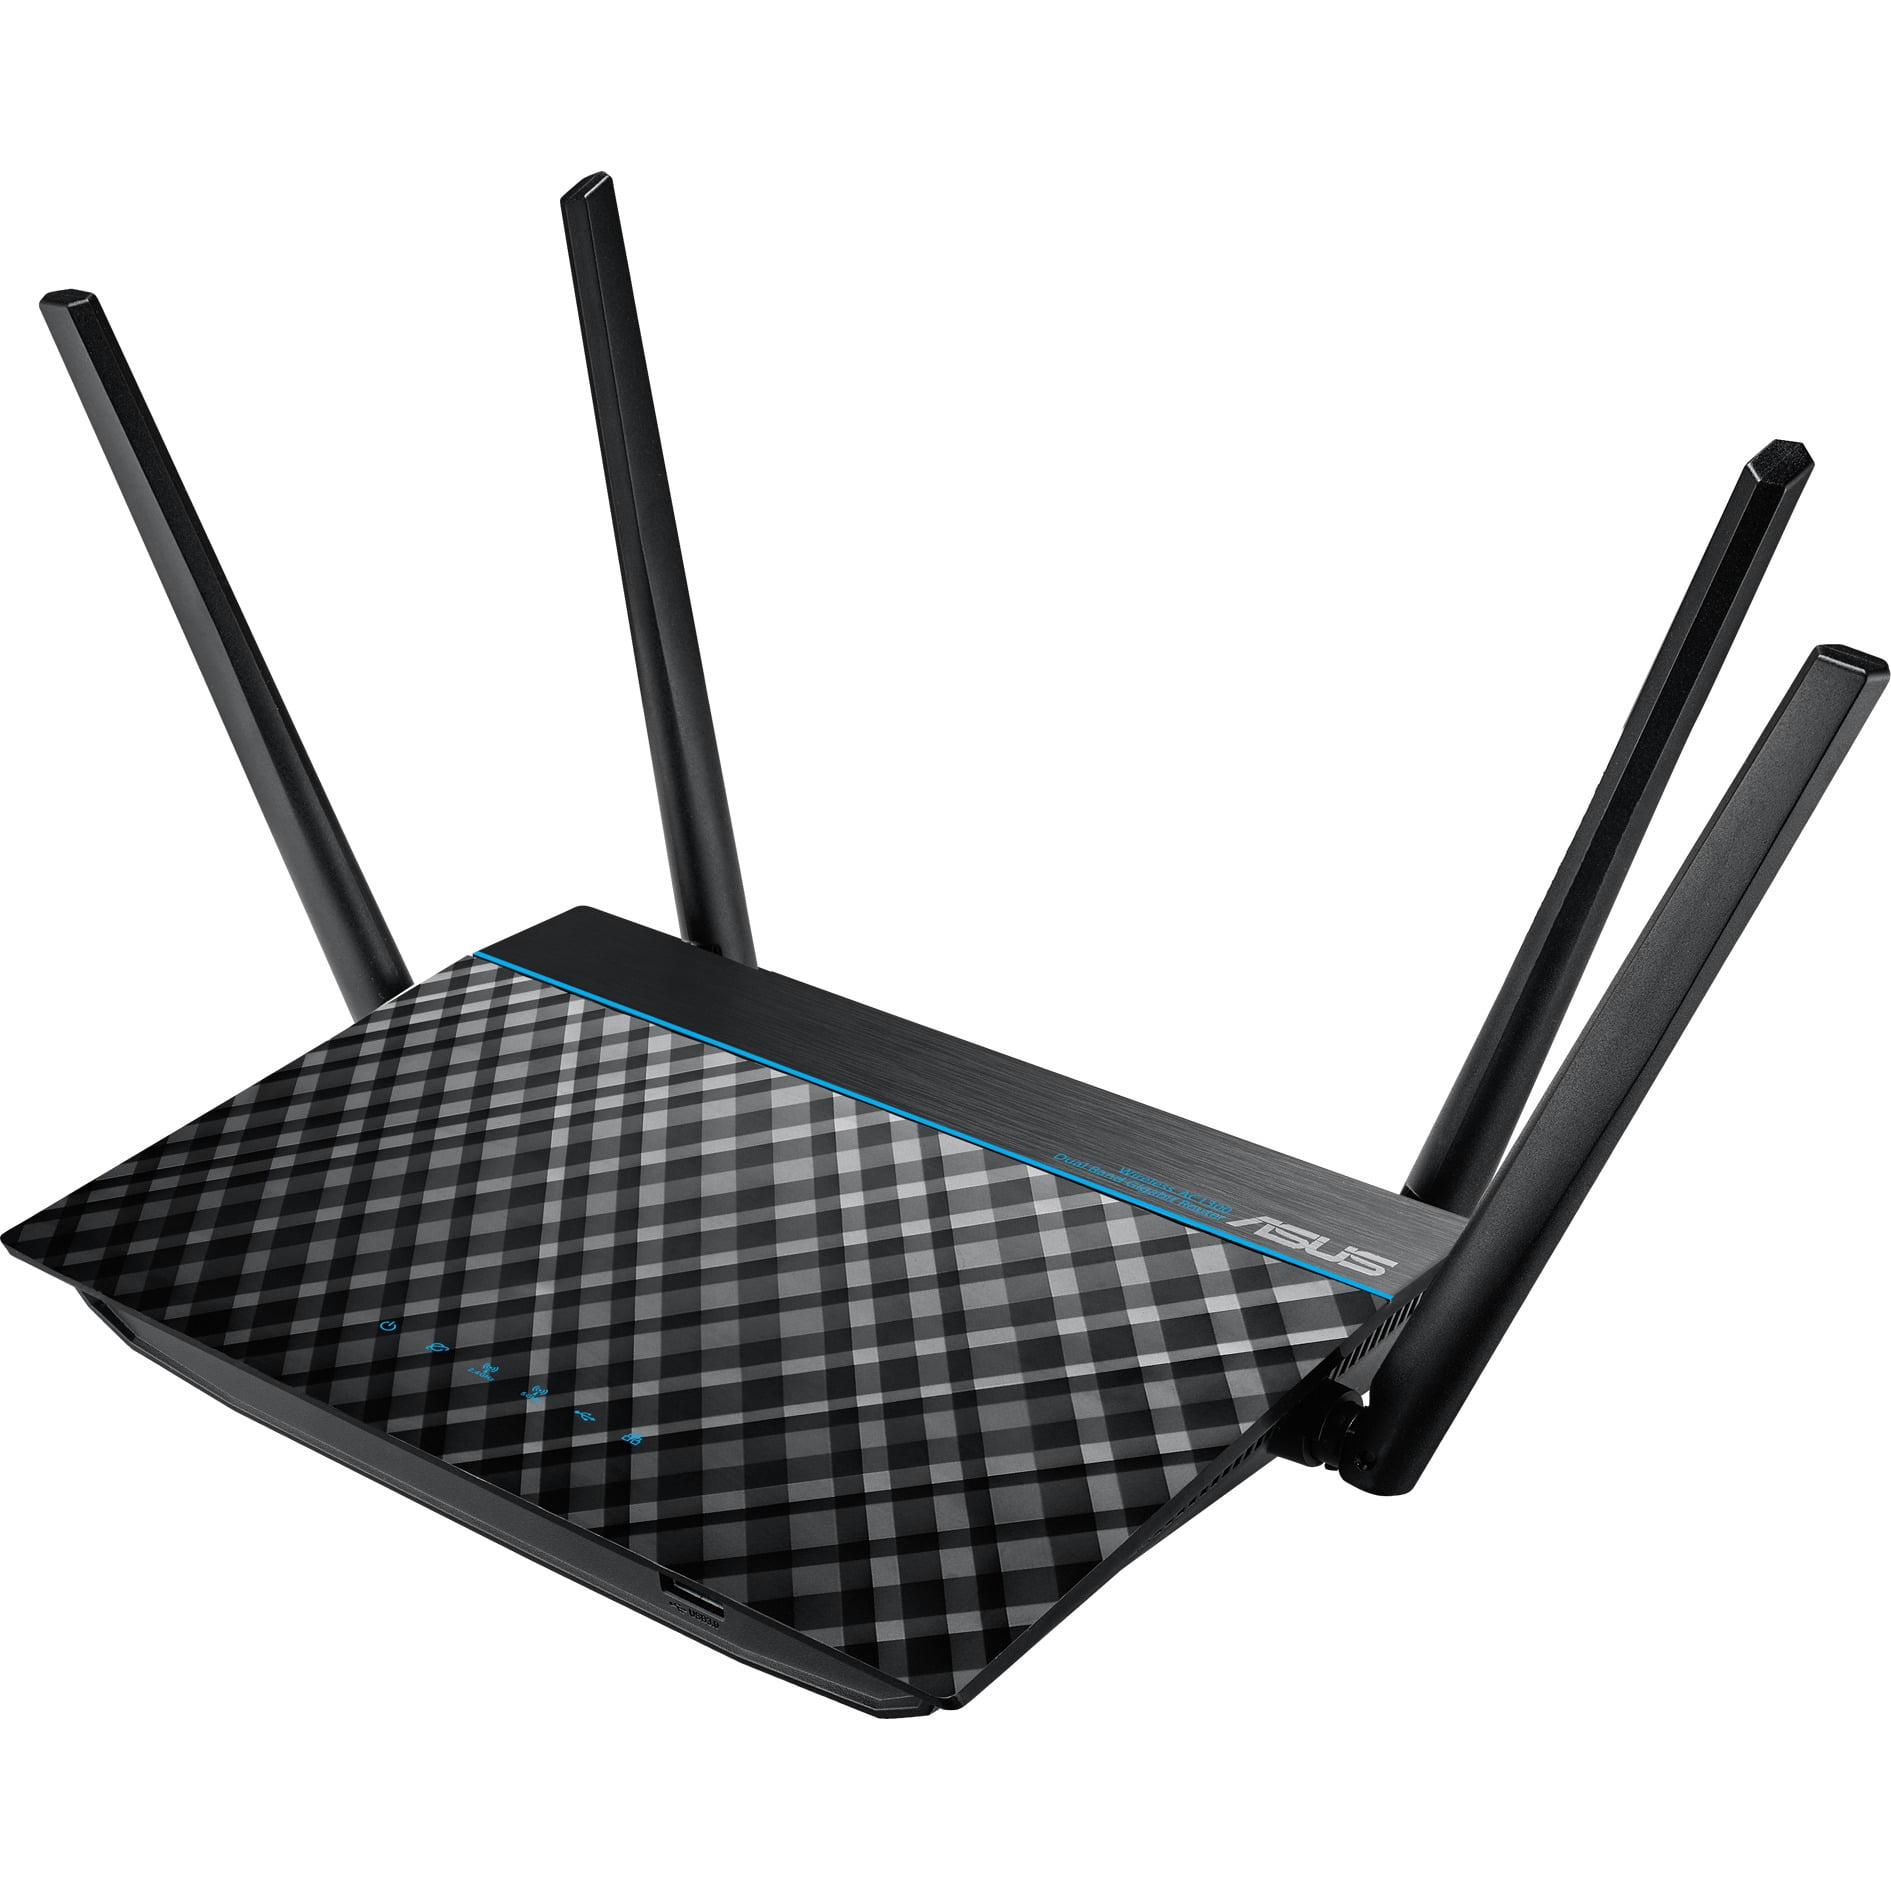 ASUS RT-ACRH13 Dual-Band 2x2 AC1300 Wifi 4-port Gigabit Router with USB 3.0 